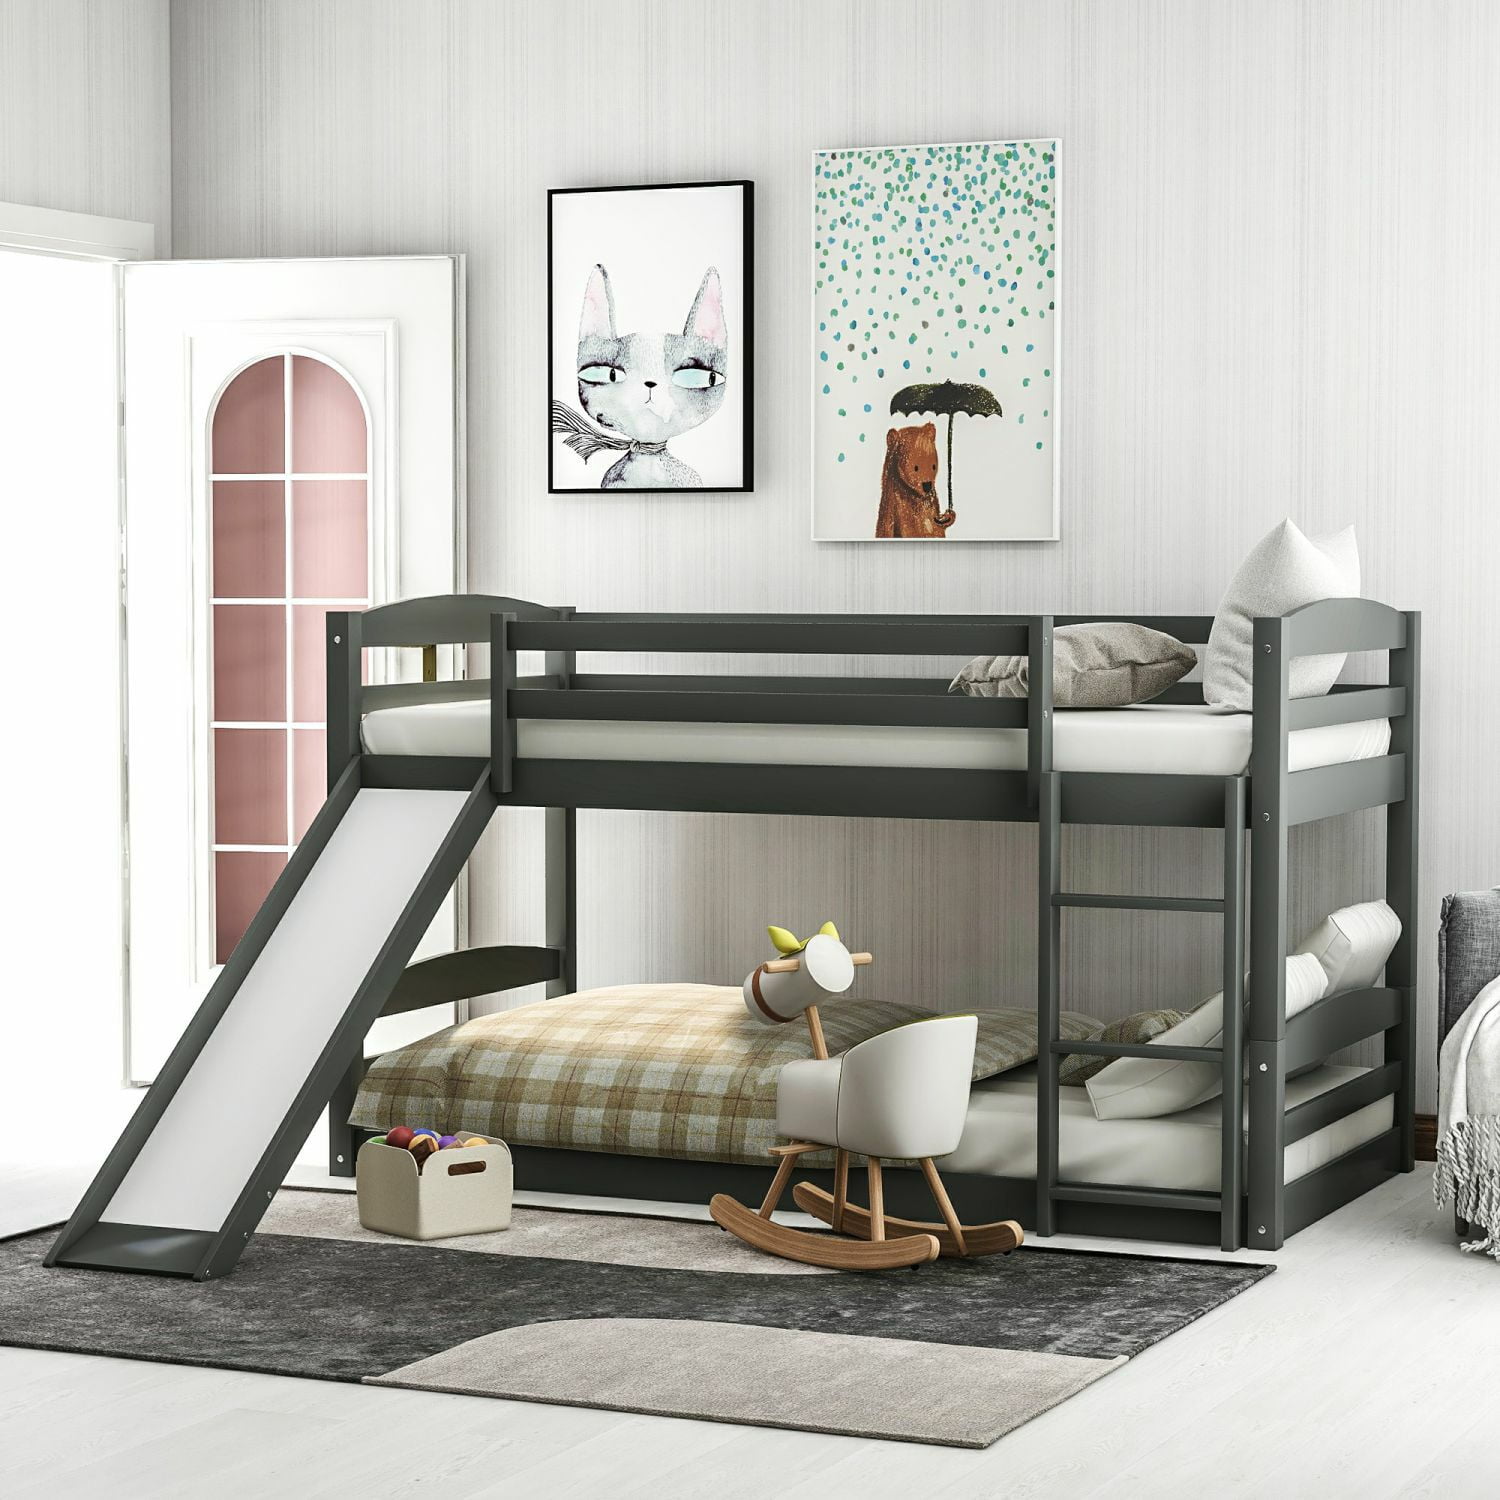 Twin Over Low Bunk Bed With Slide, Furniture Row Bunk Bed With Slide